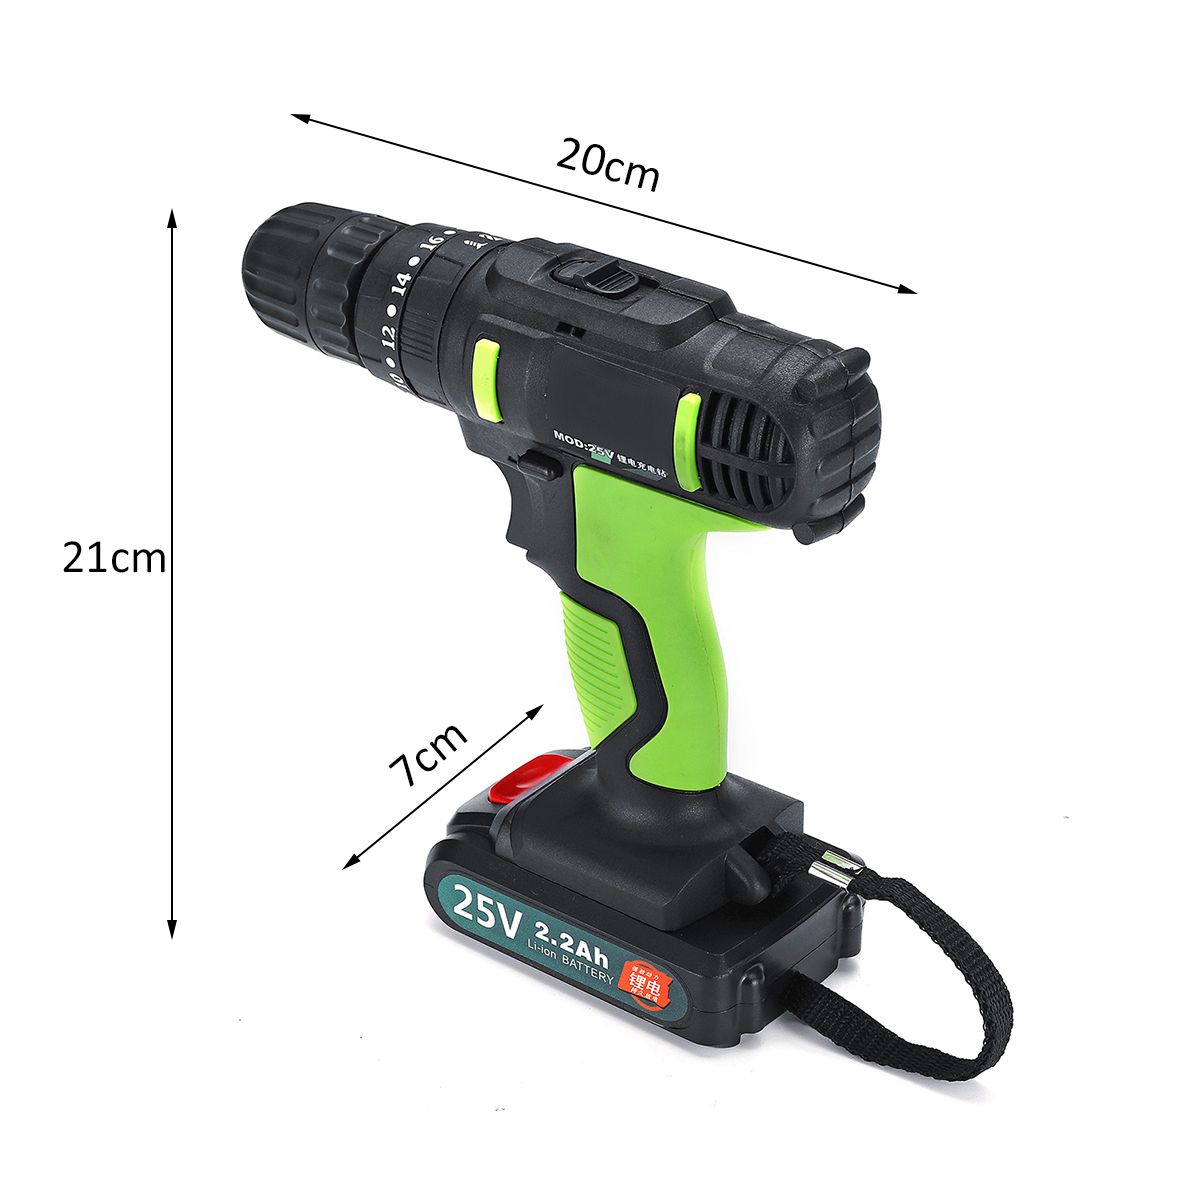 3-in-1-25V-Cordless-Impact-Drill-Double-Speed-Electric-Screwdriver-Li-ion-Battery-Rechargable-Drill-1371313